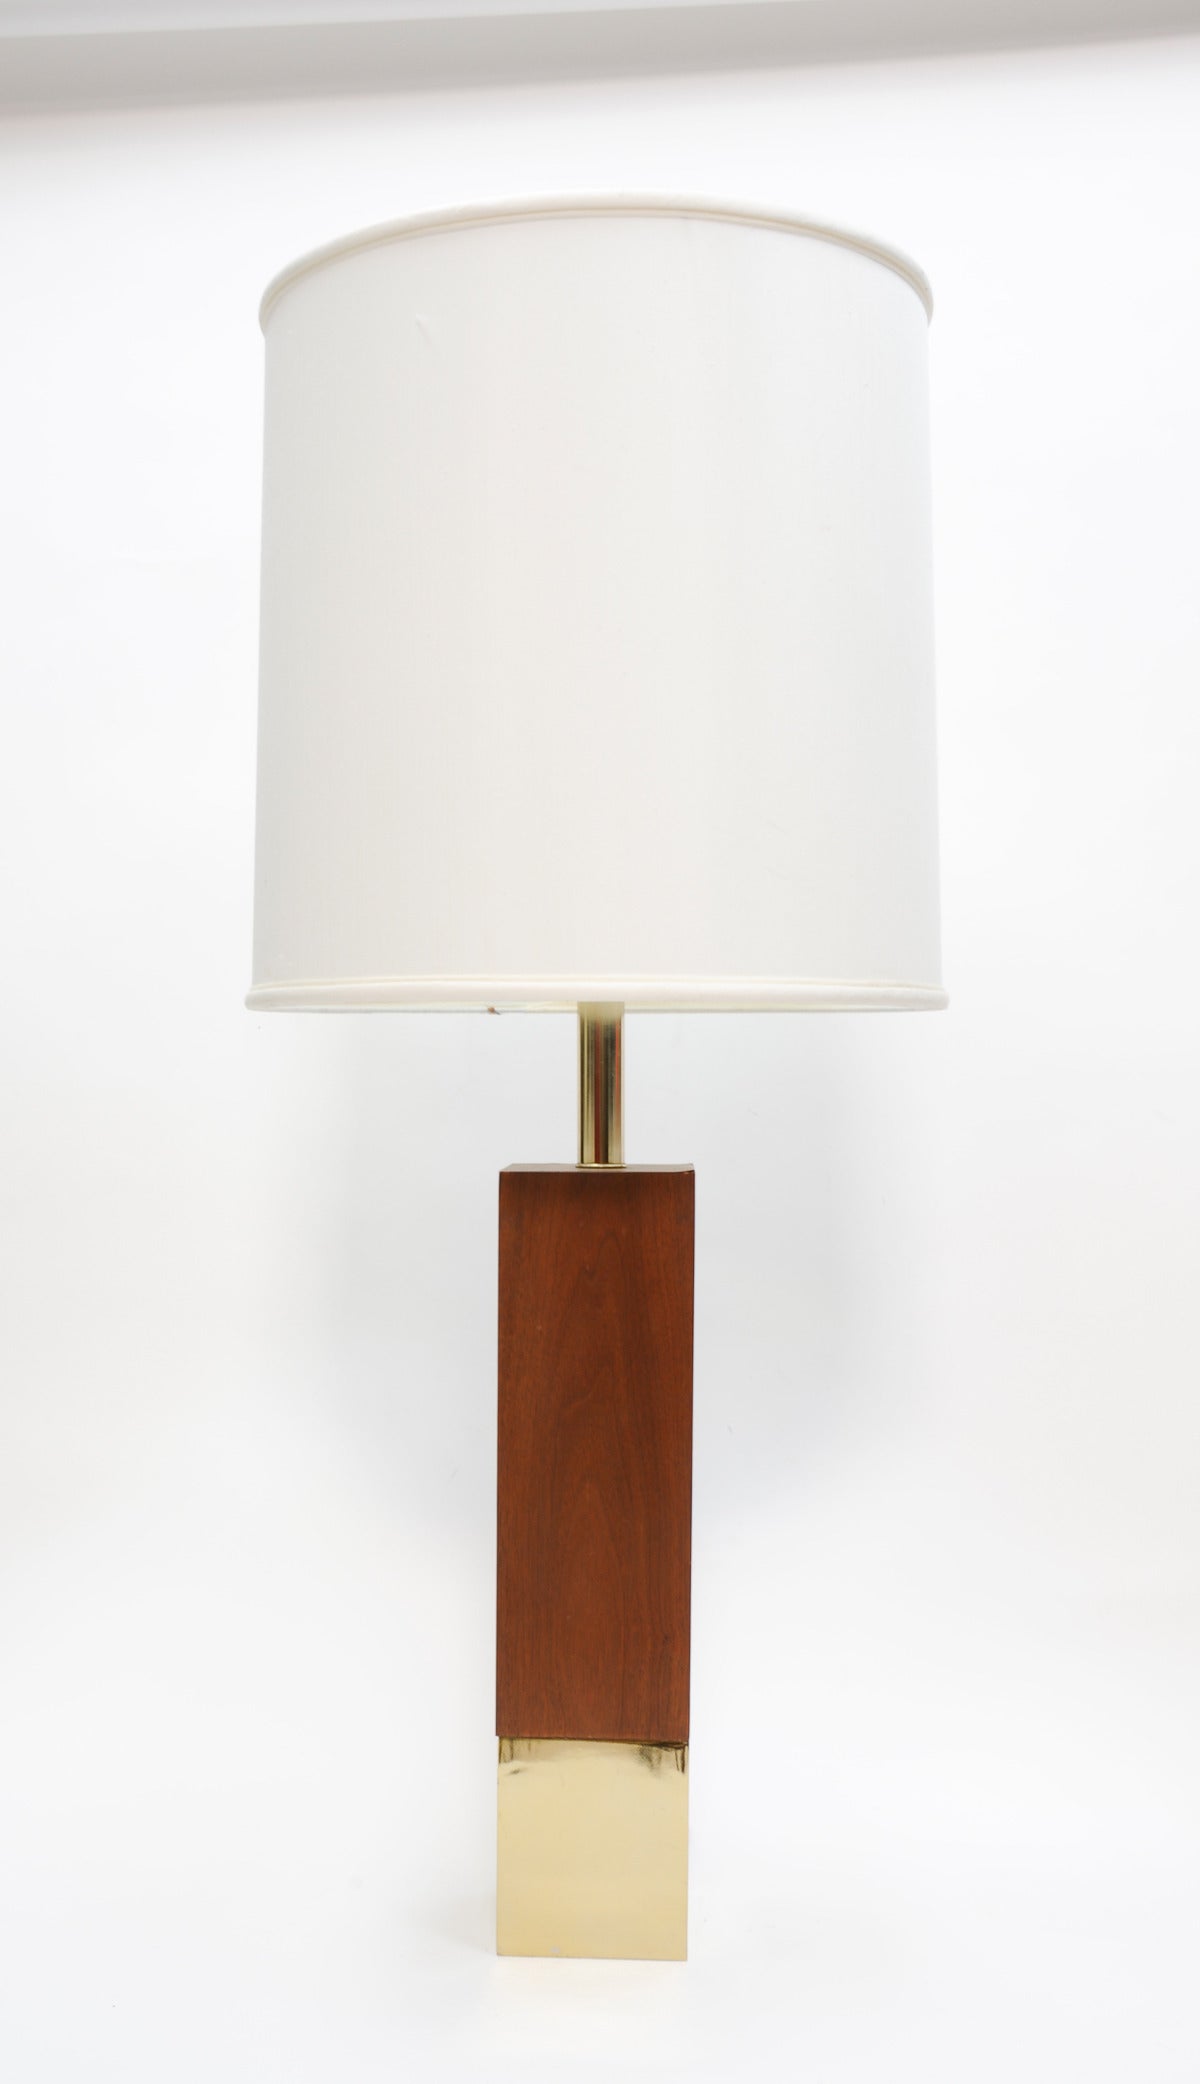 These walnut and brass lamps are wonderful in the scaled. The bottom are a cast brass base. The tops are veneer walnut.